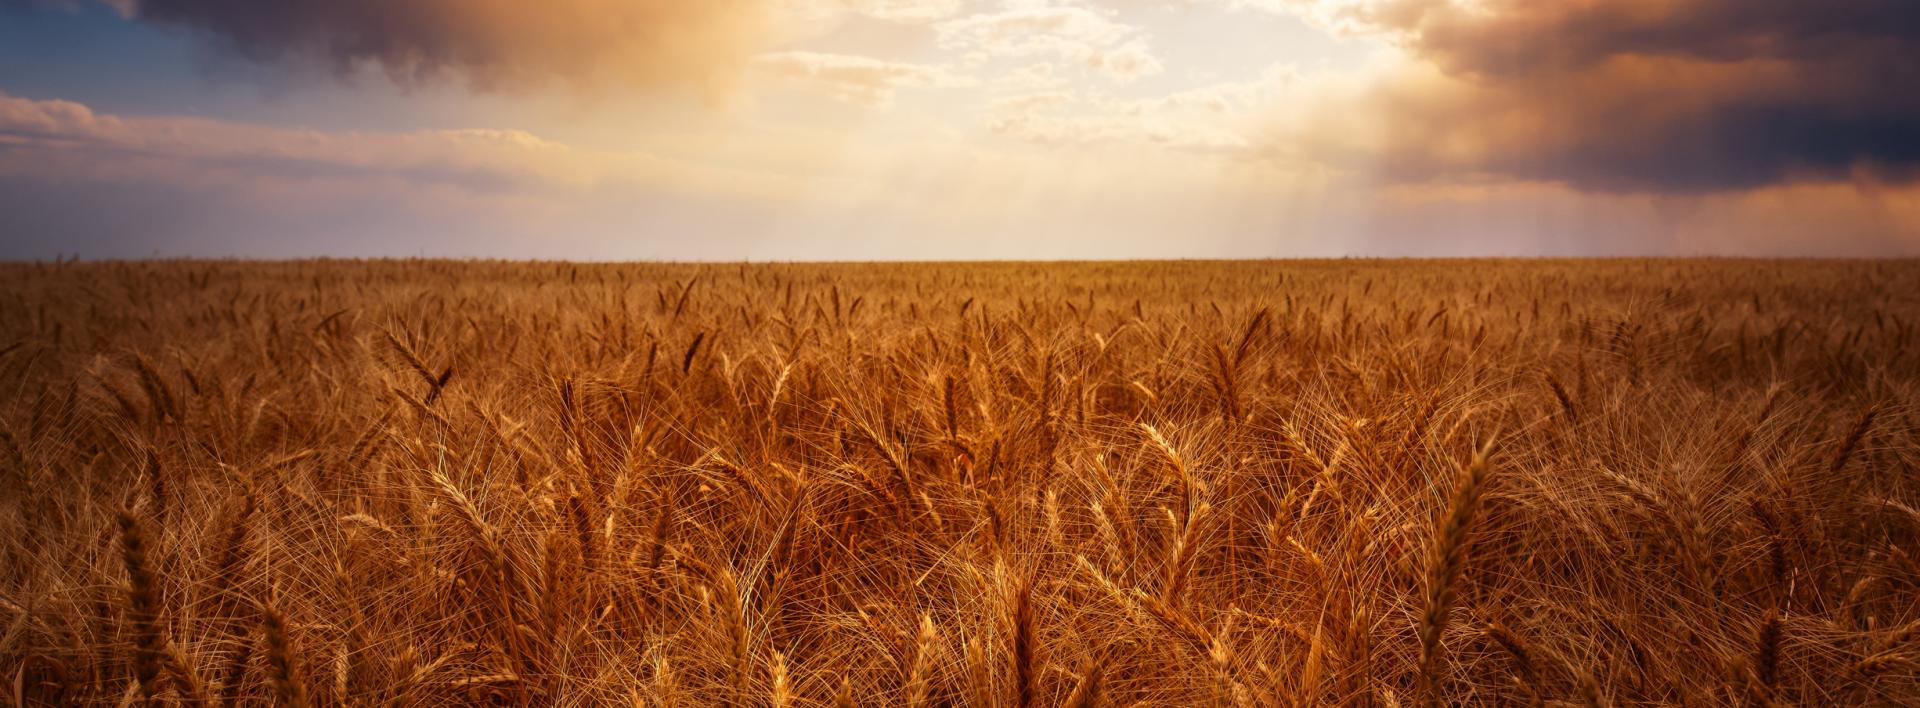 Field of wheat at sunset in the Colorado plains. Photo credit: Scott Book, Shutterstock.